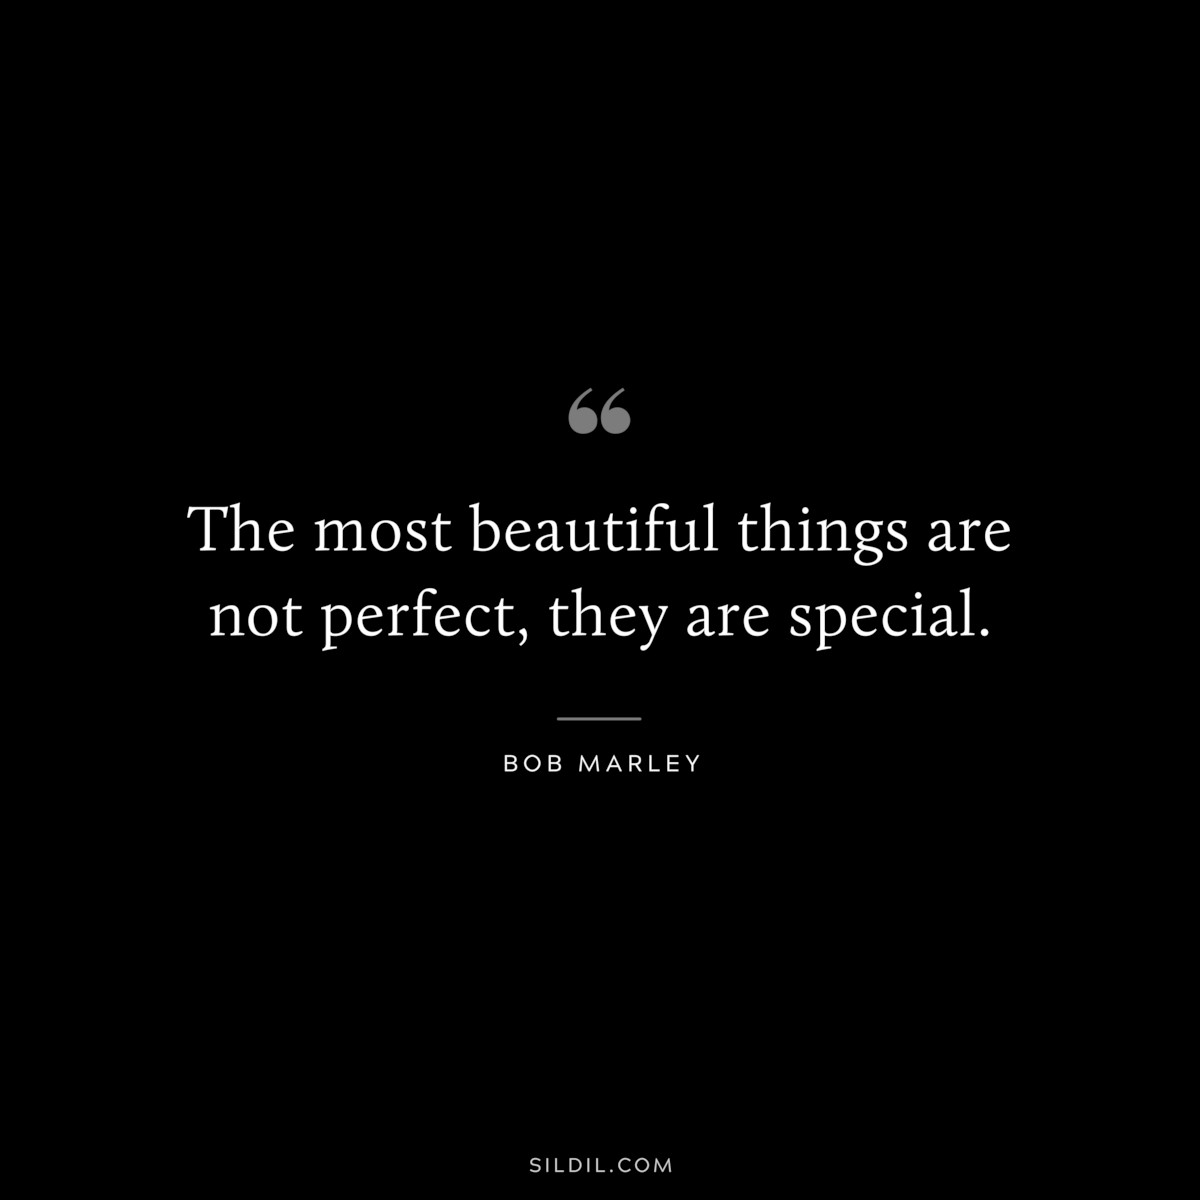 The most beautiful things are not perfect, they are special. ― Bob Marley